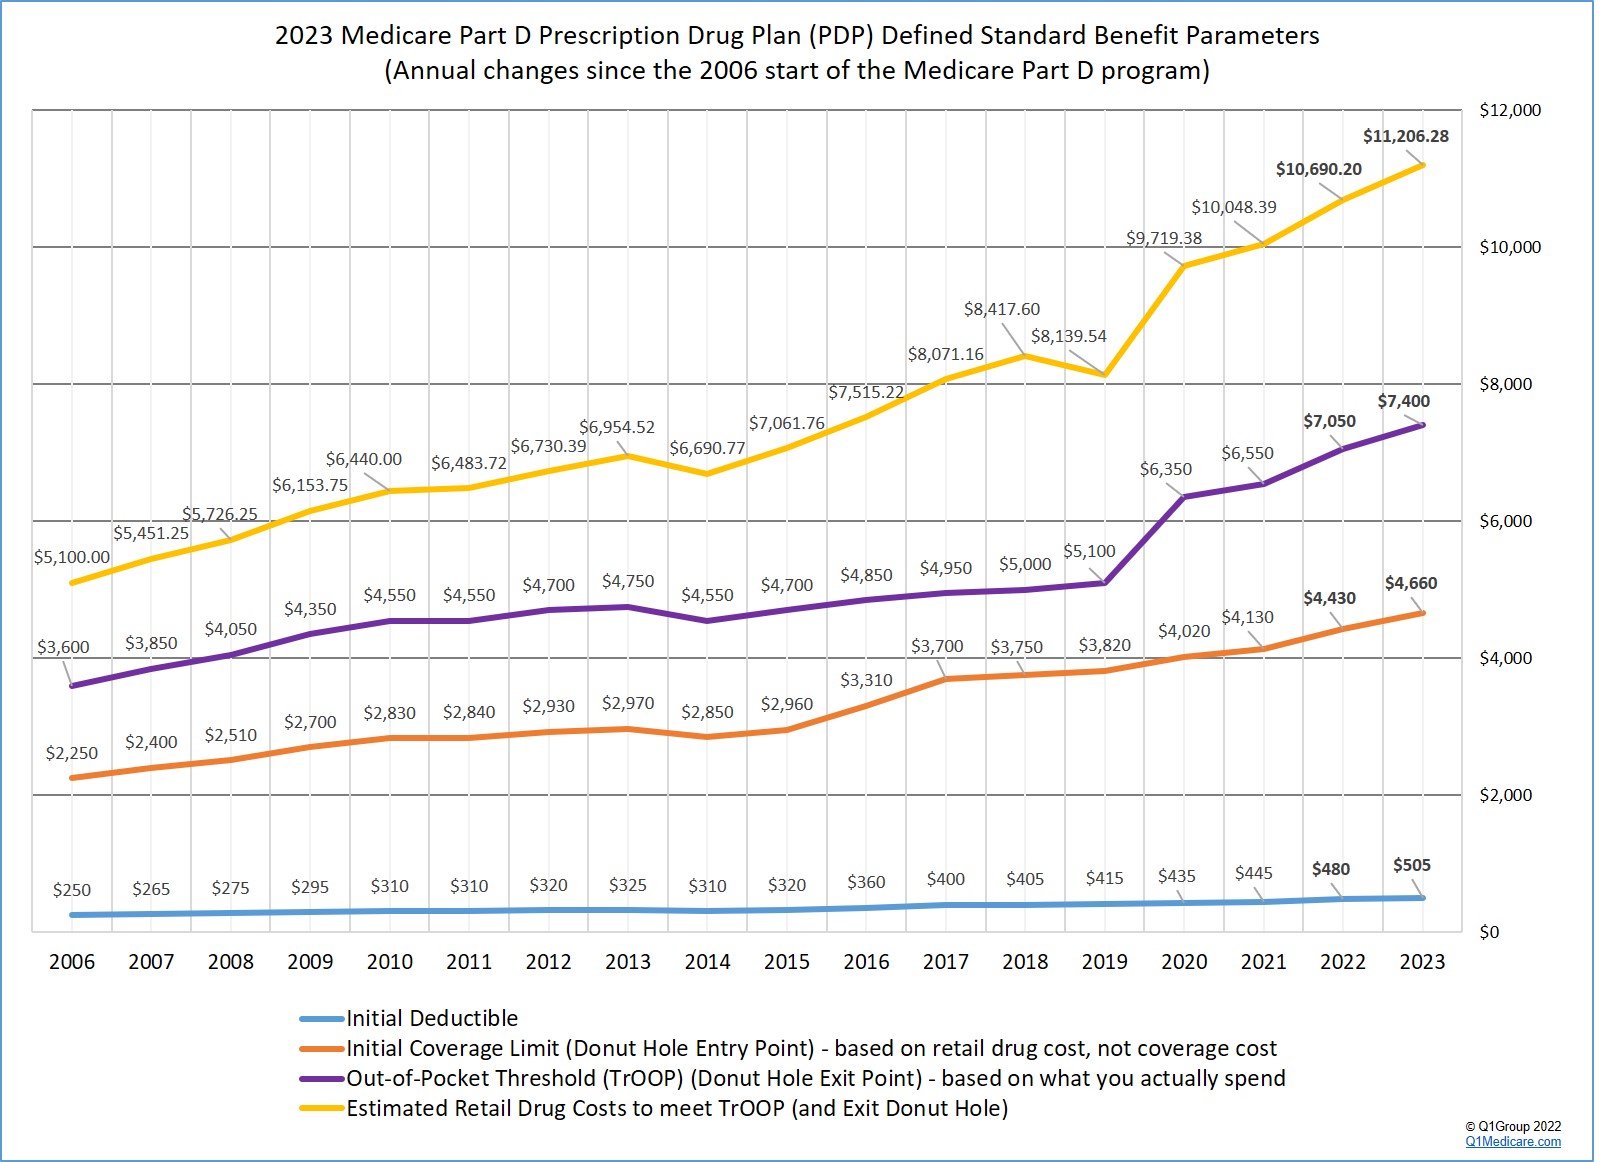 2023 Preliminary Medicare Part D defined standard benefit parameters -- annual changes since 2006